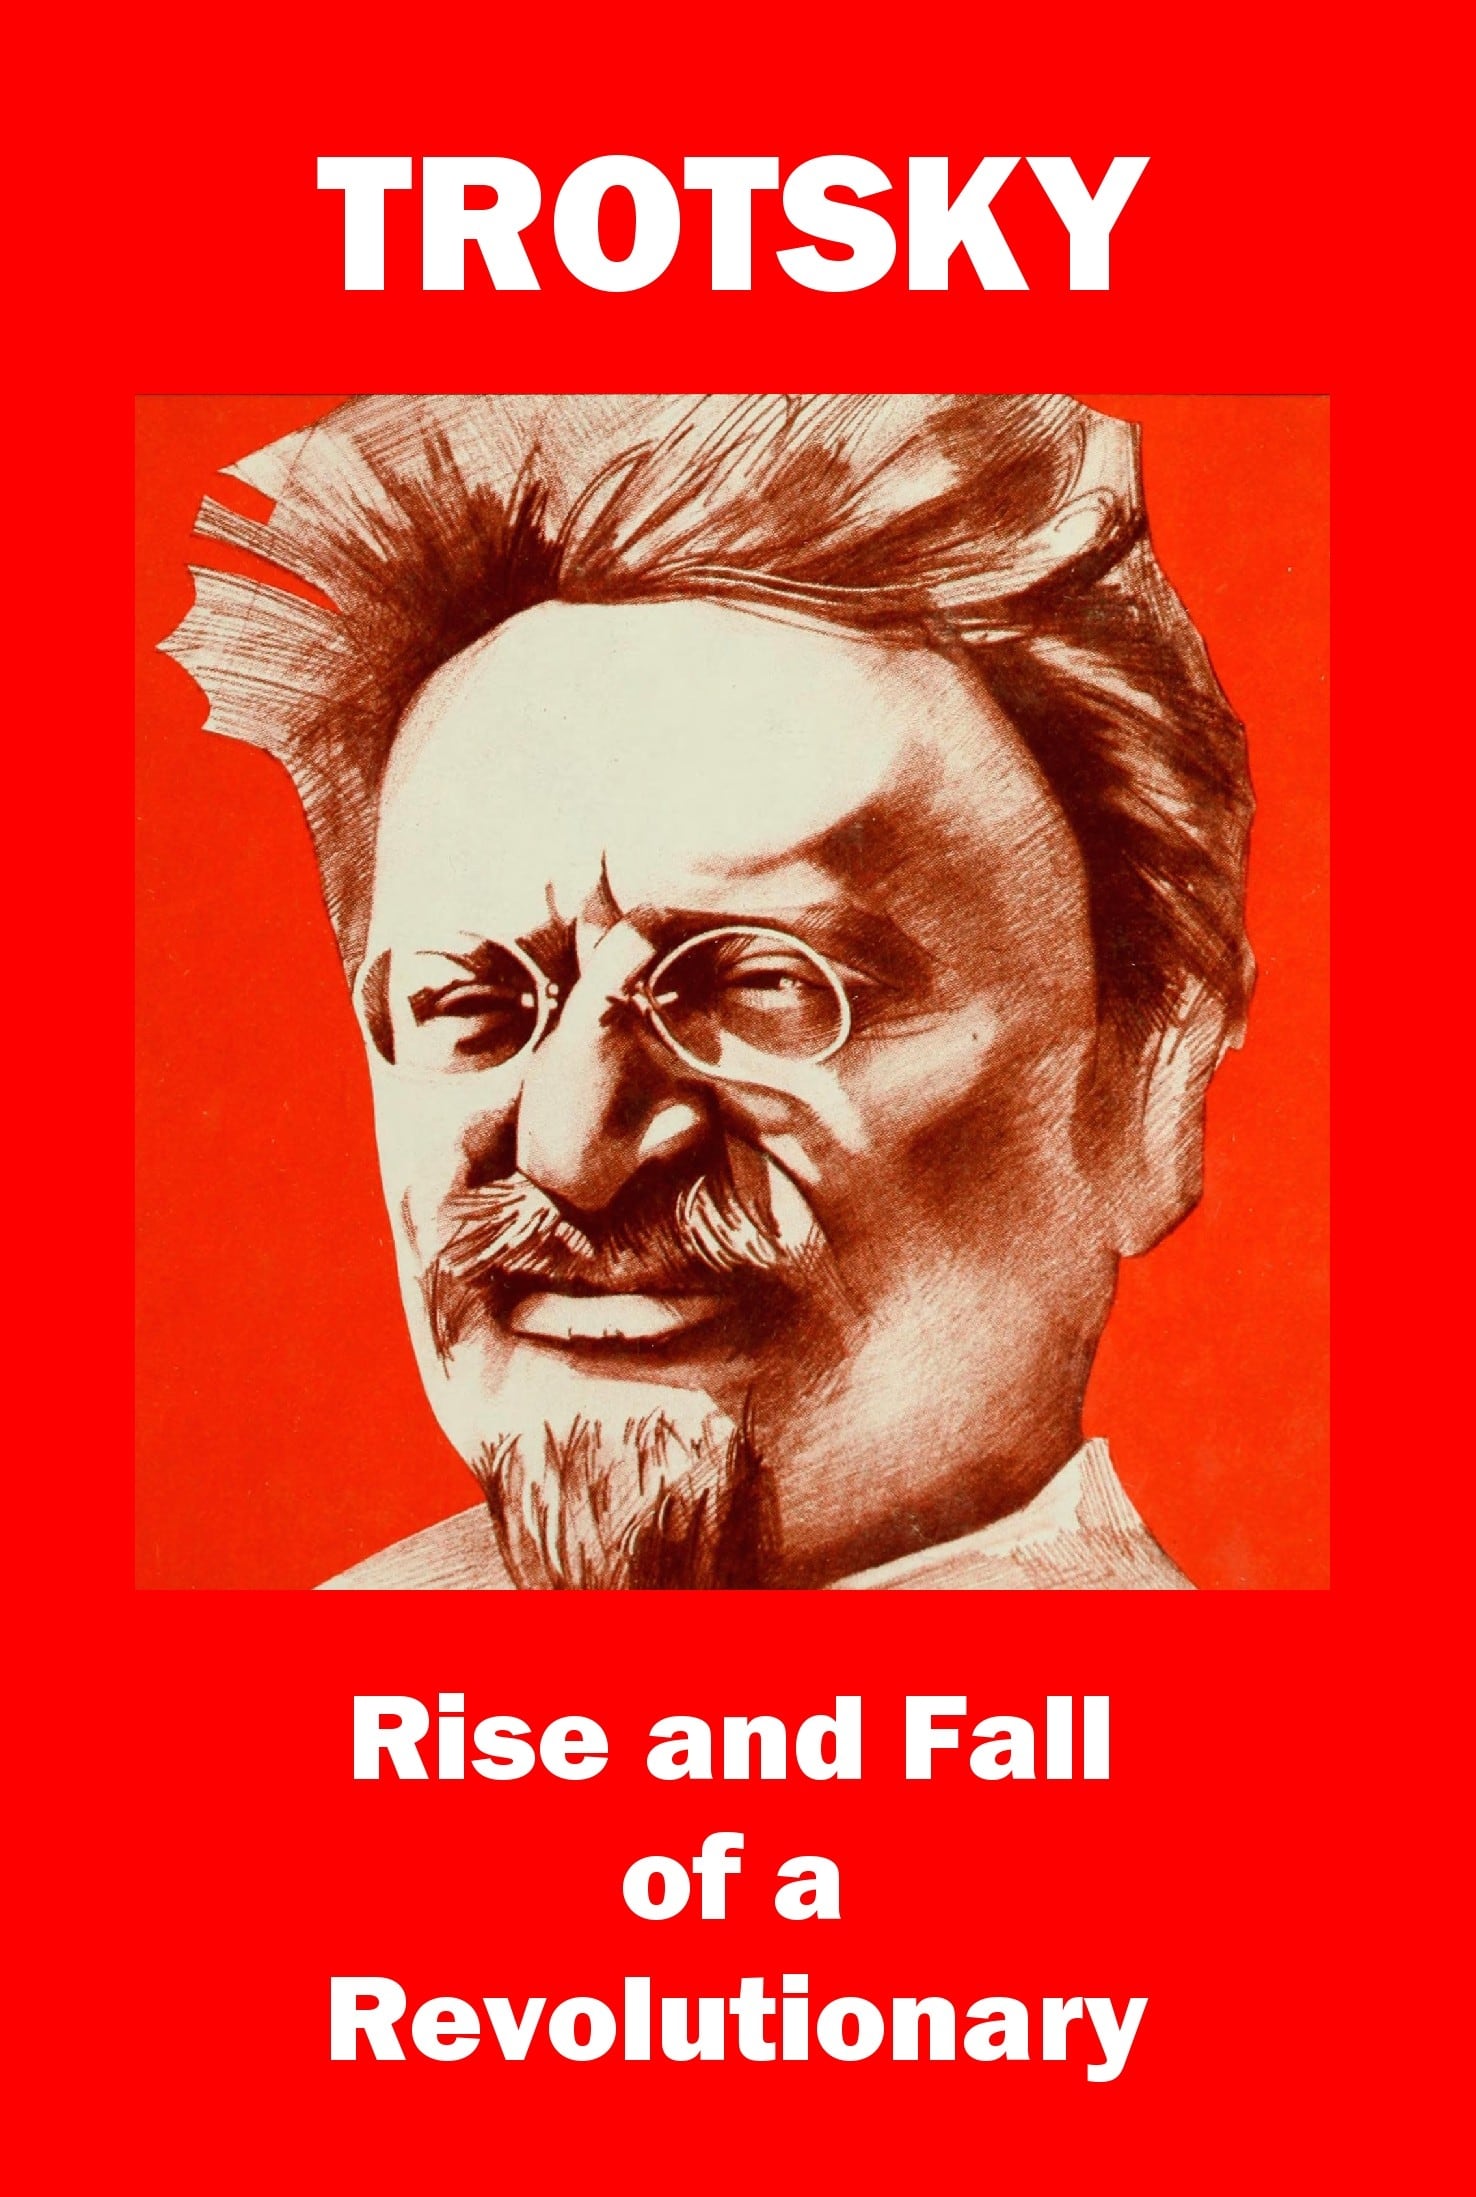 Trotsky: Rise and Fall of a Revolutionary